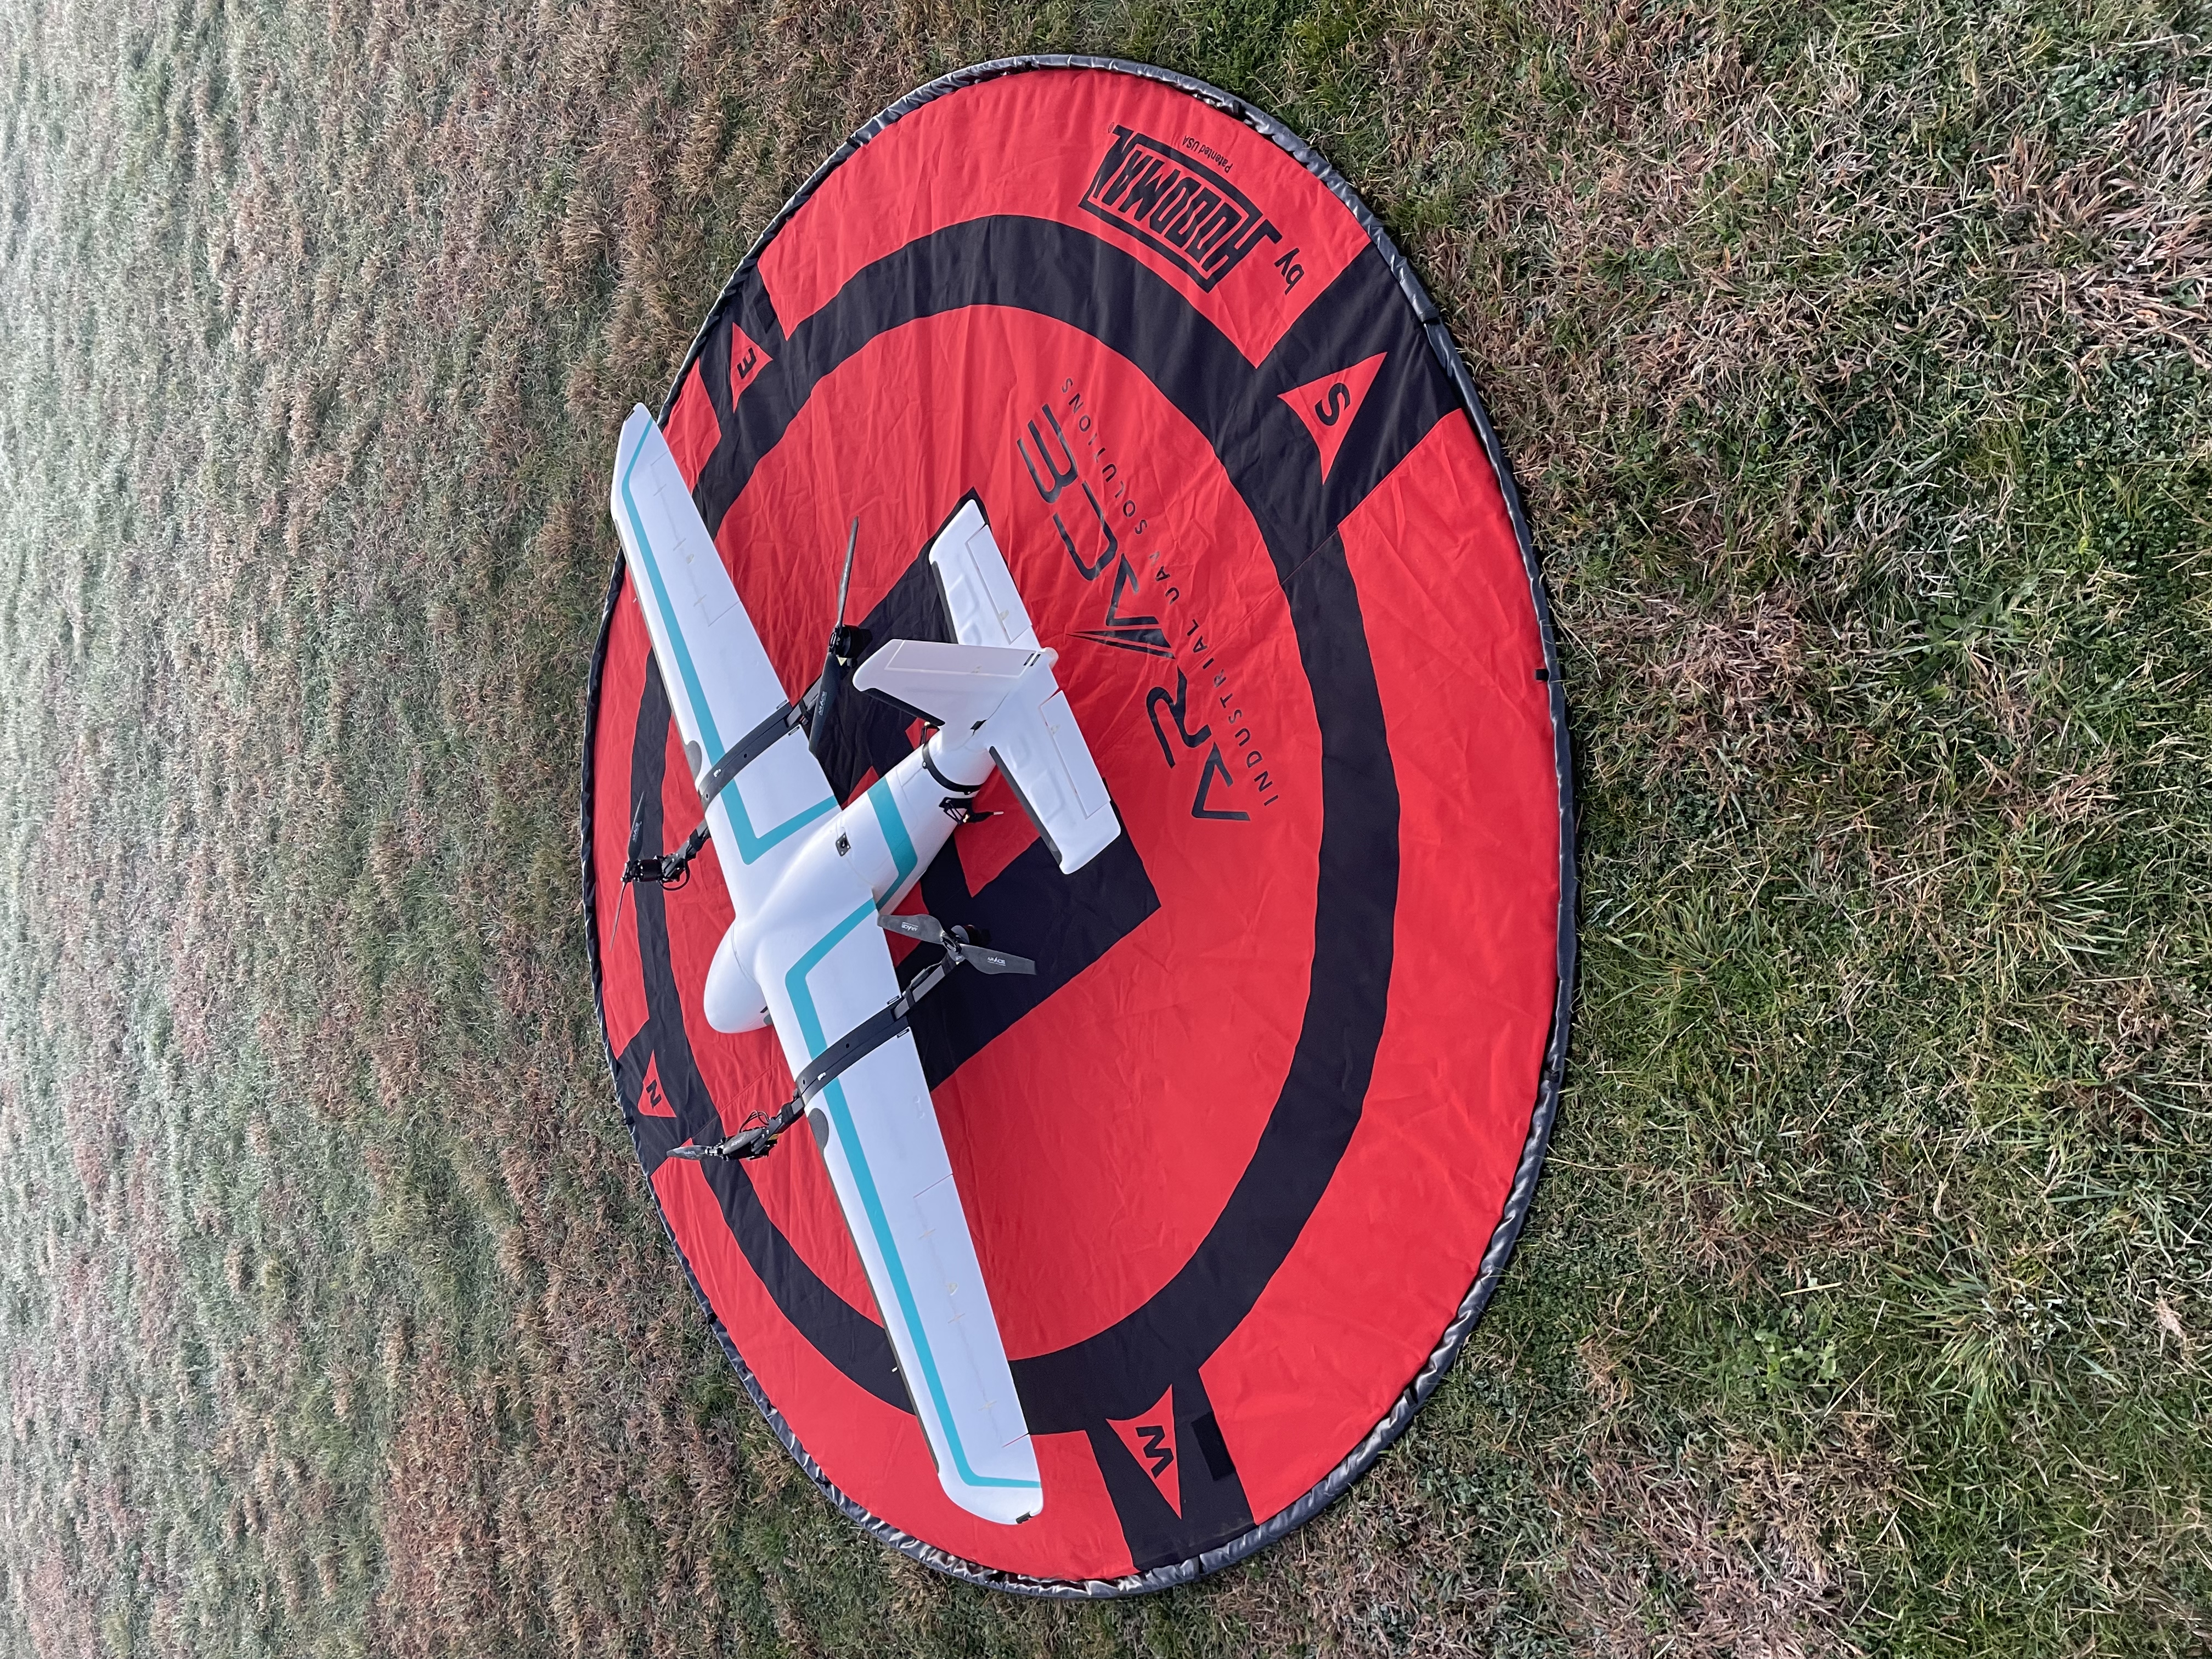 Griffin Pro Drone sitting on a red ARACE launch pad